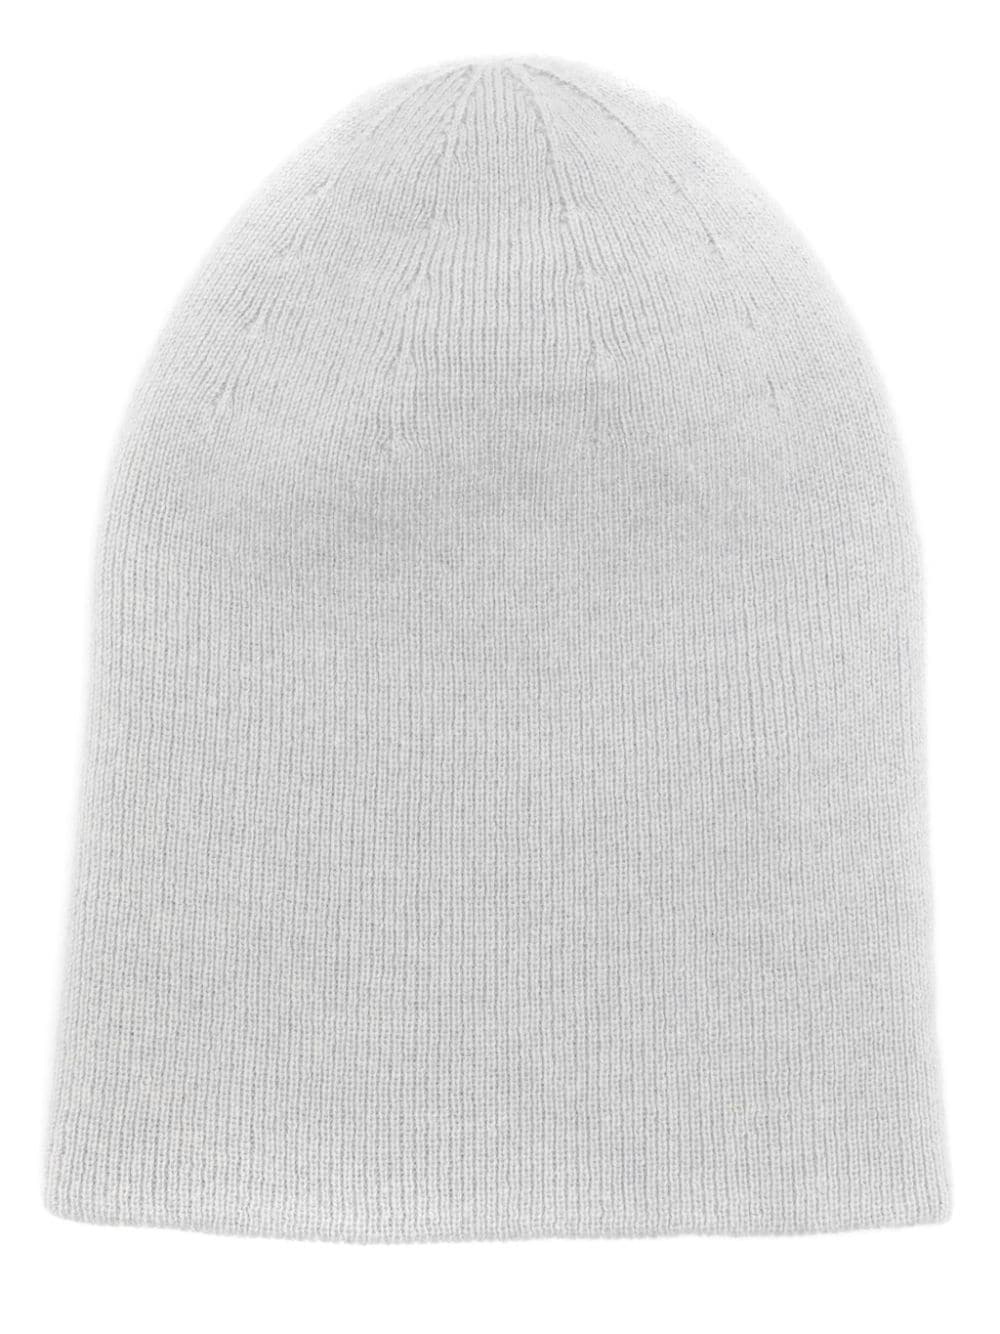 ribbed-knit cashmere beanie - 1